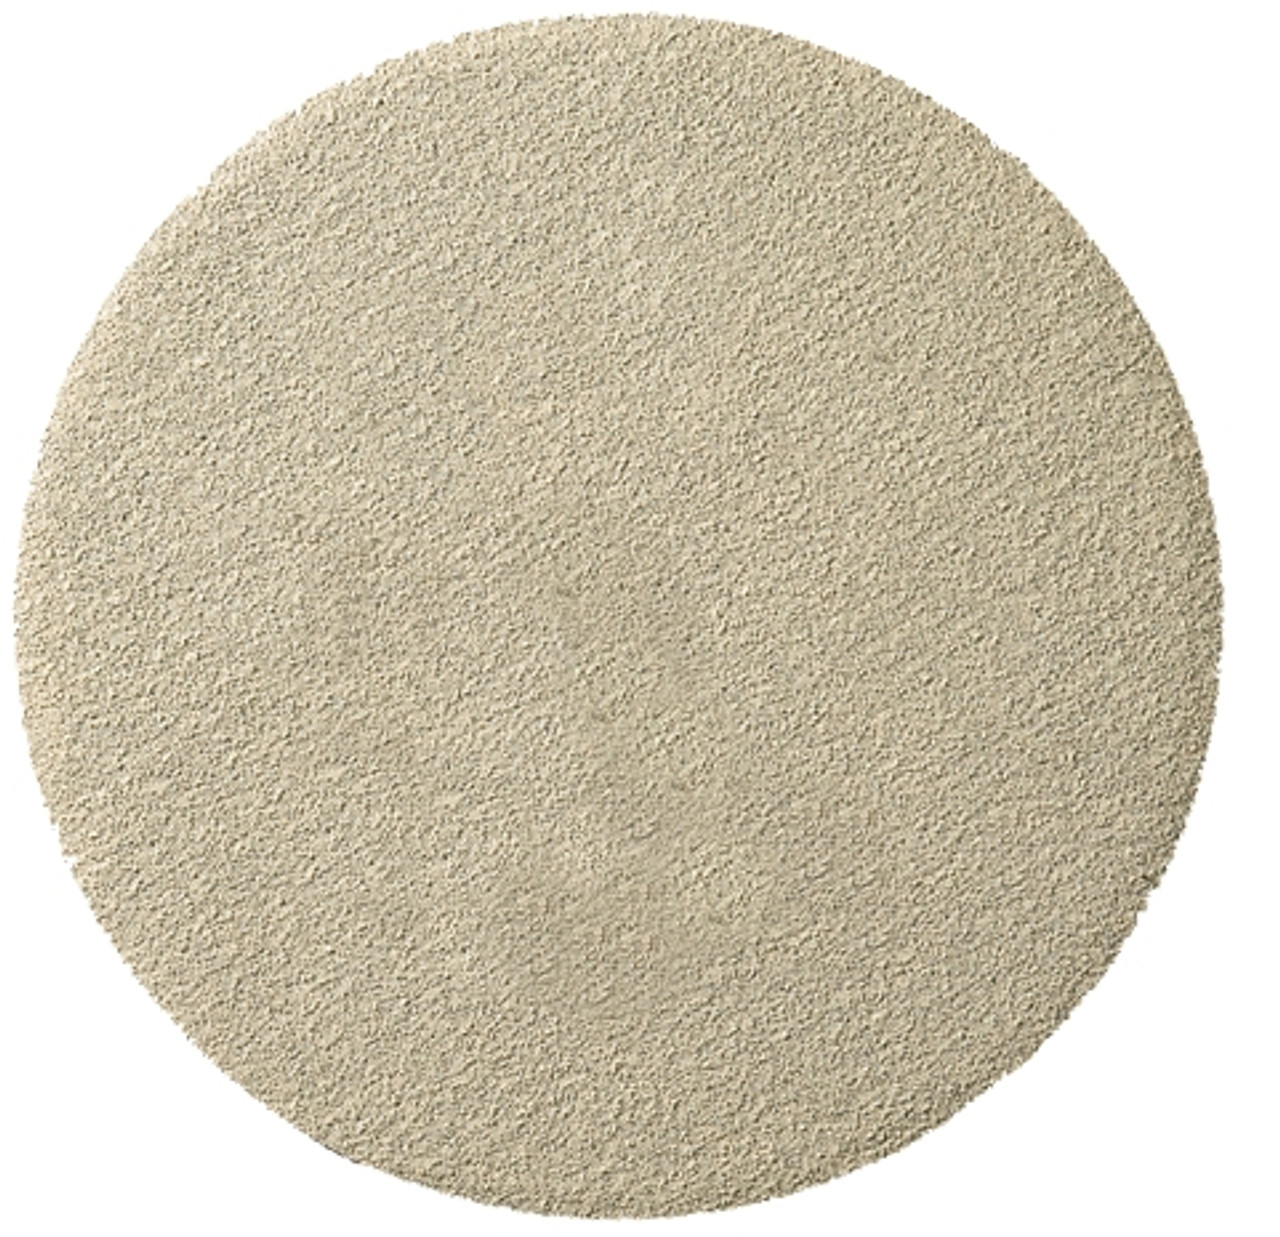 Self Fastening Disc - (Ps33) Paper/Aluminium Oxide/No Hole 240Grit 180Mm